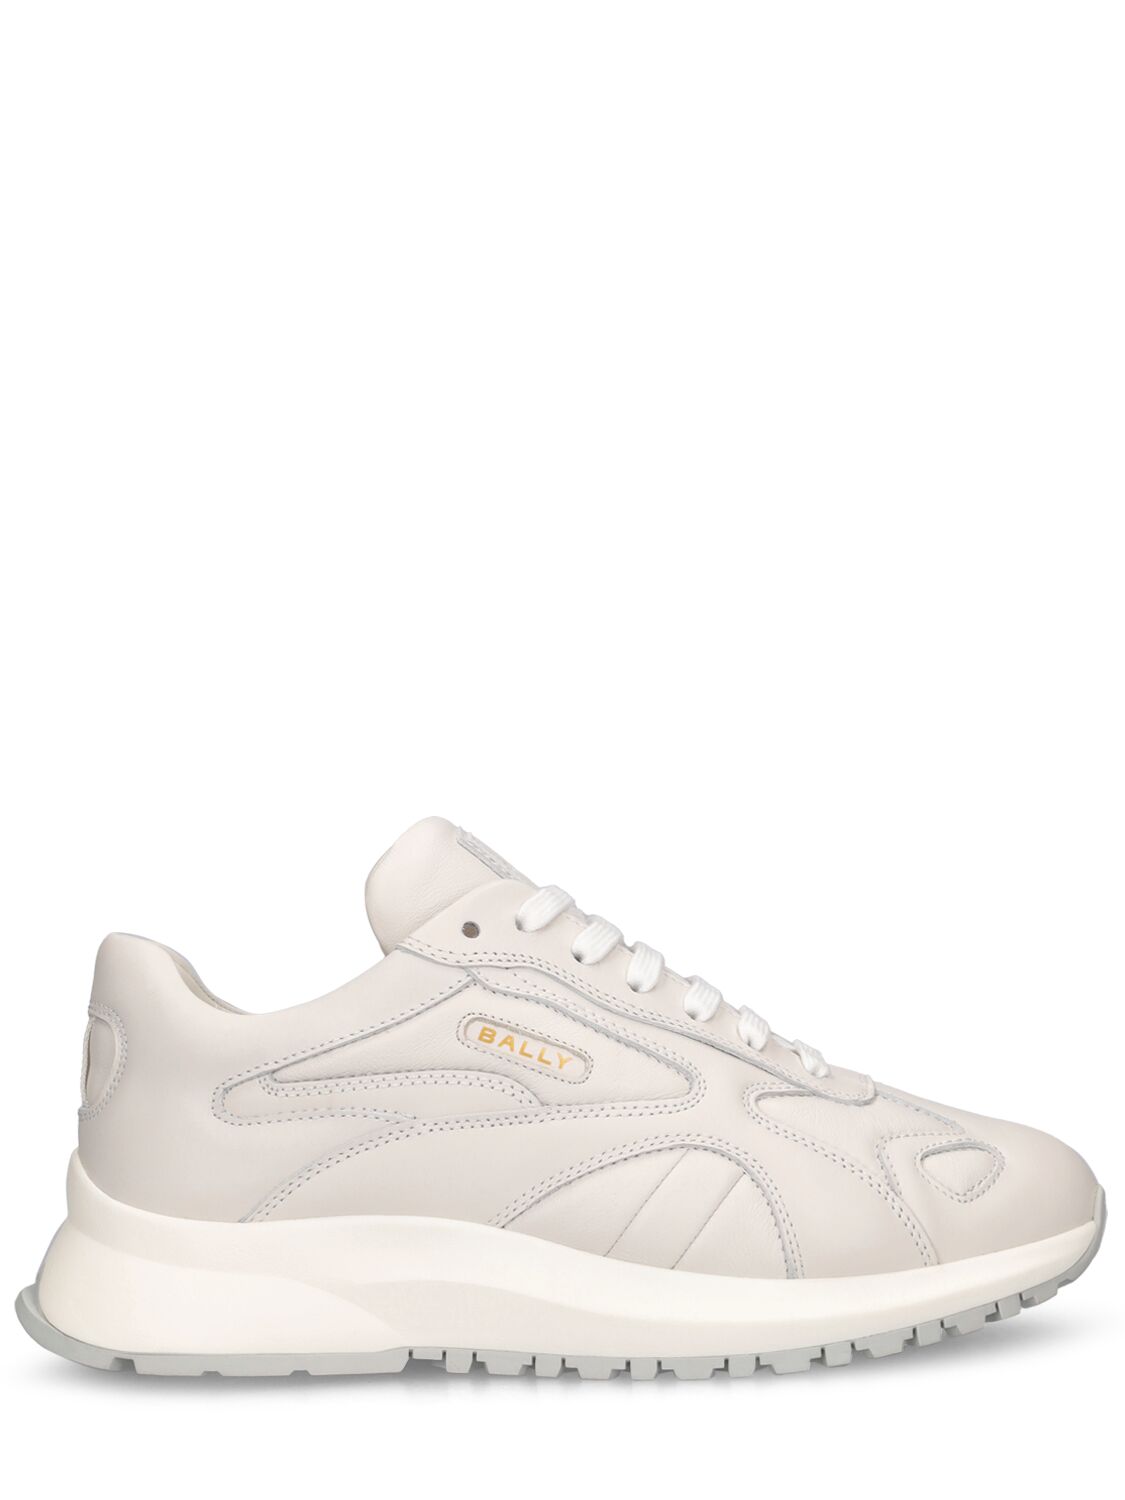 Bally Dewi Leather Sneakers In White